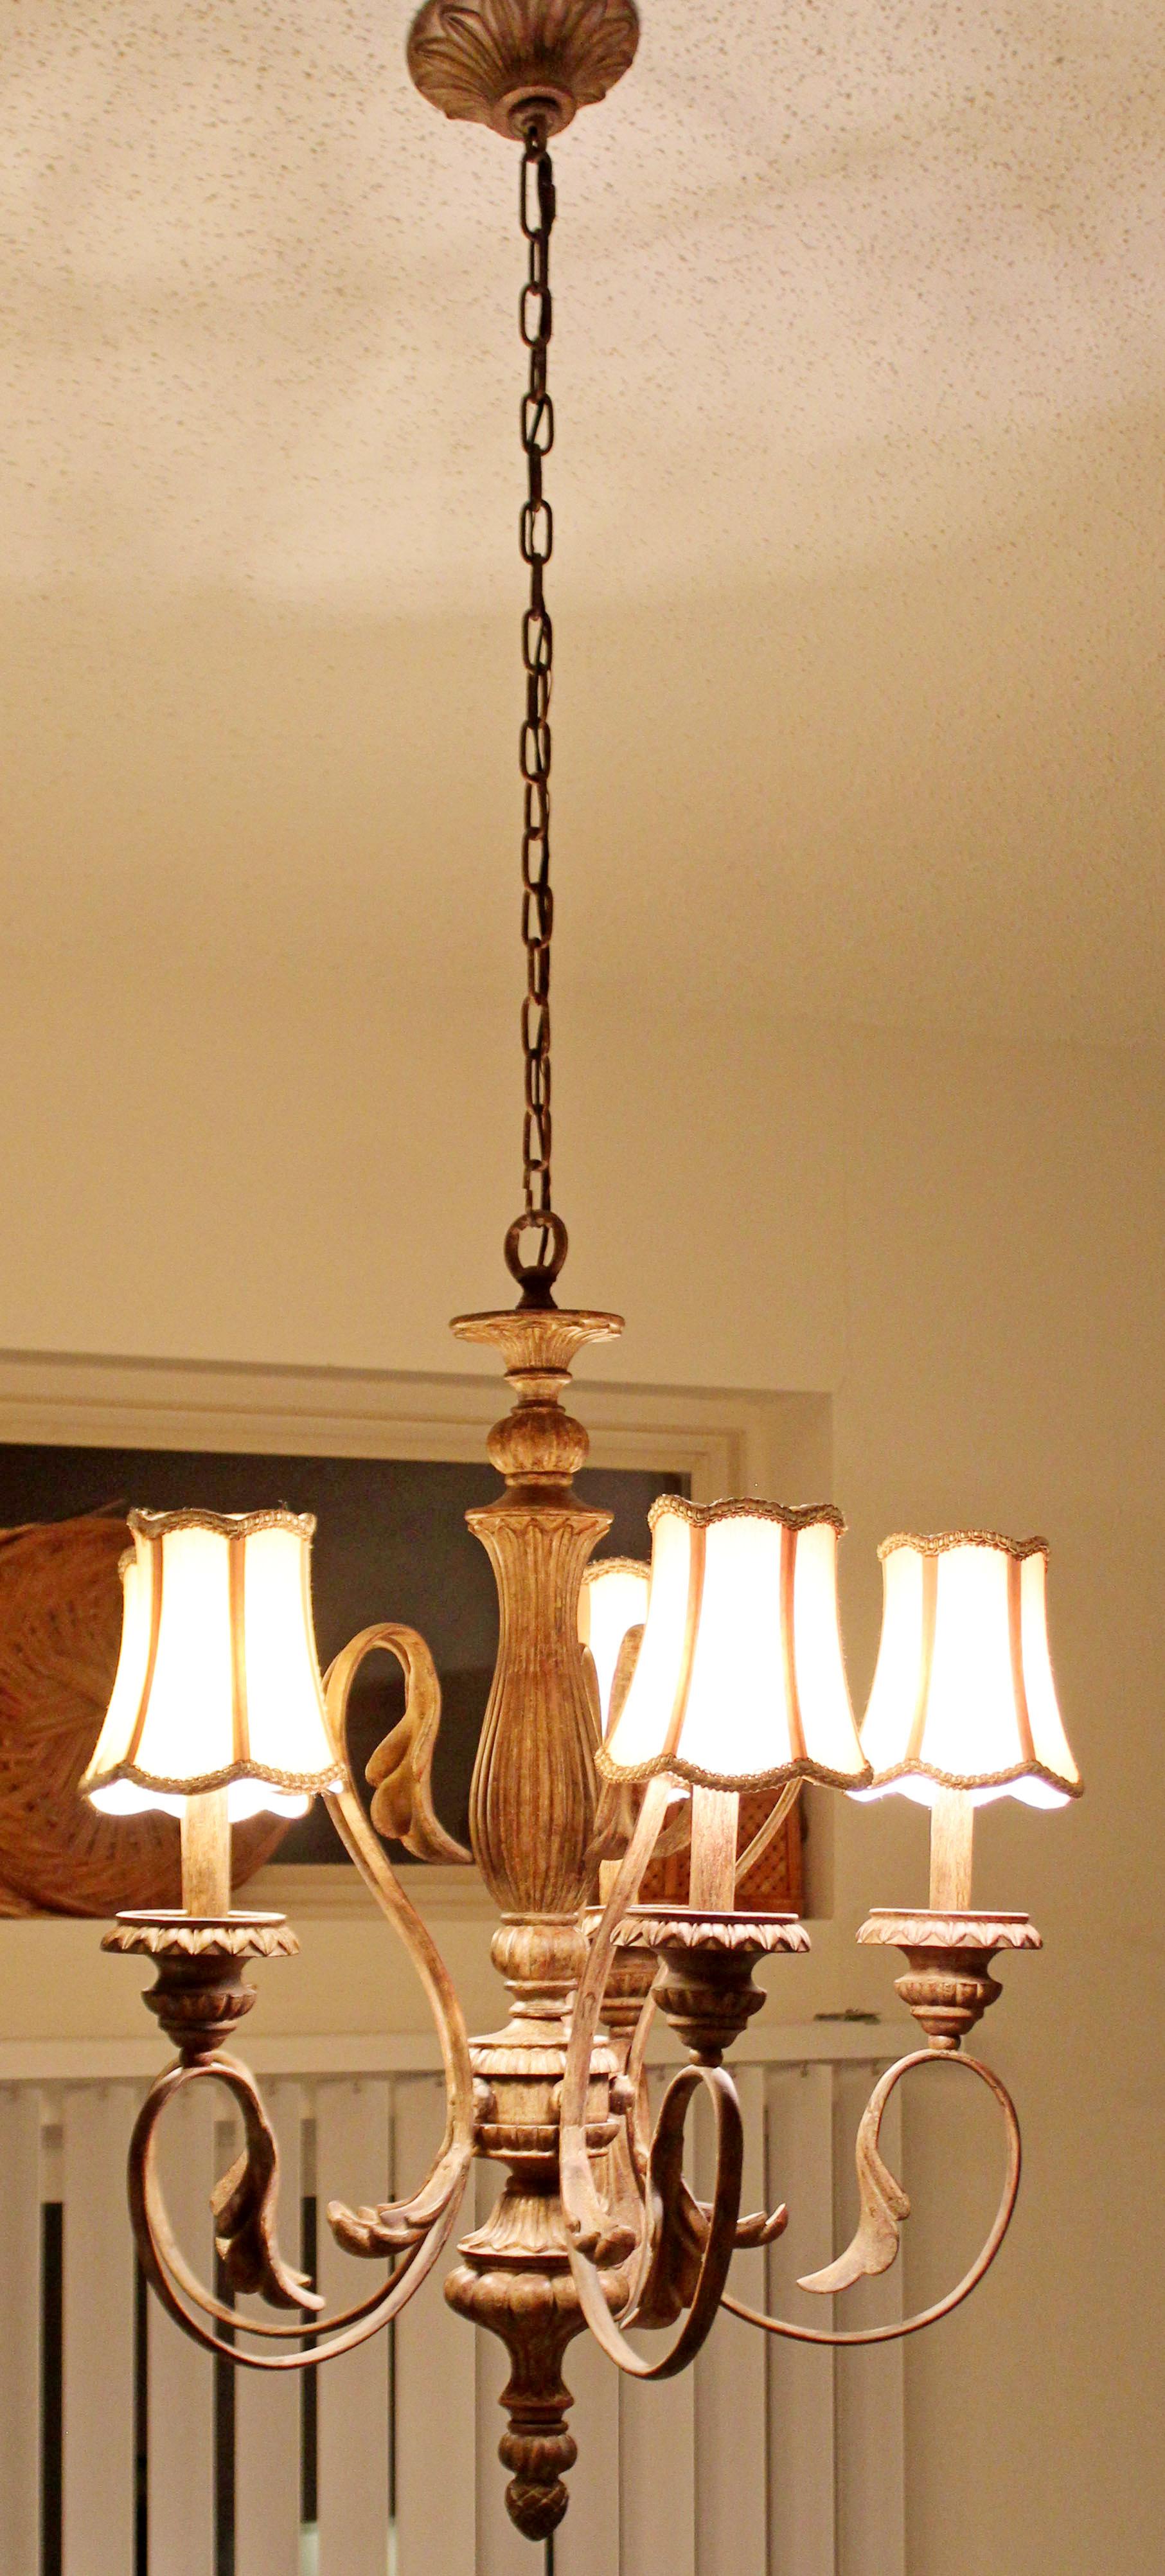 For your consideration is a five arm chandelier light fixture. In excellent condition. The dimensions are 23